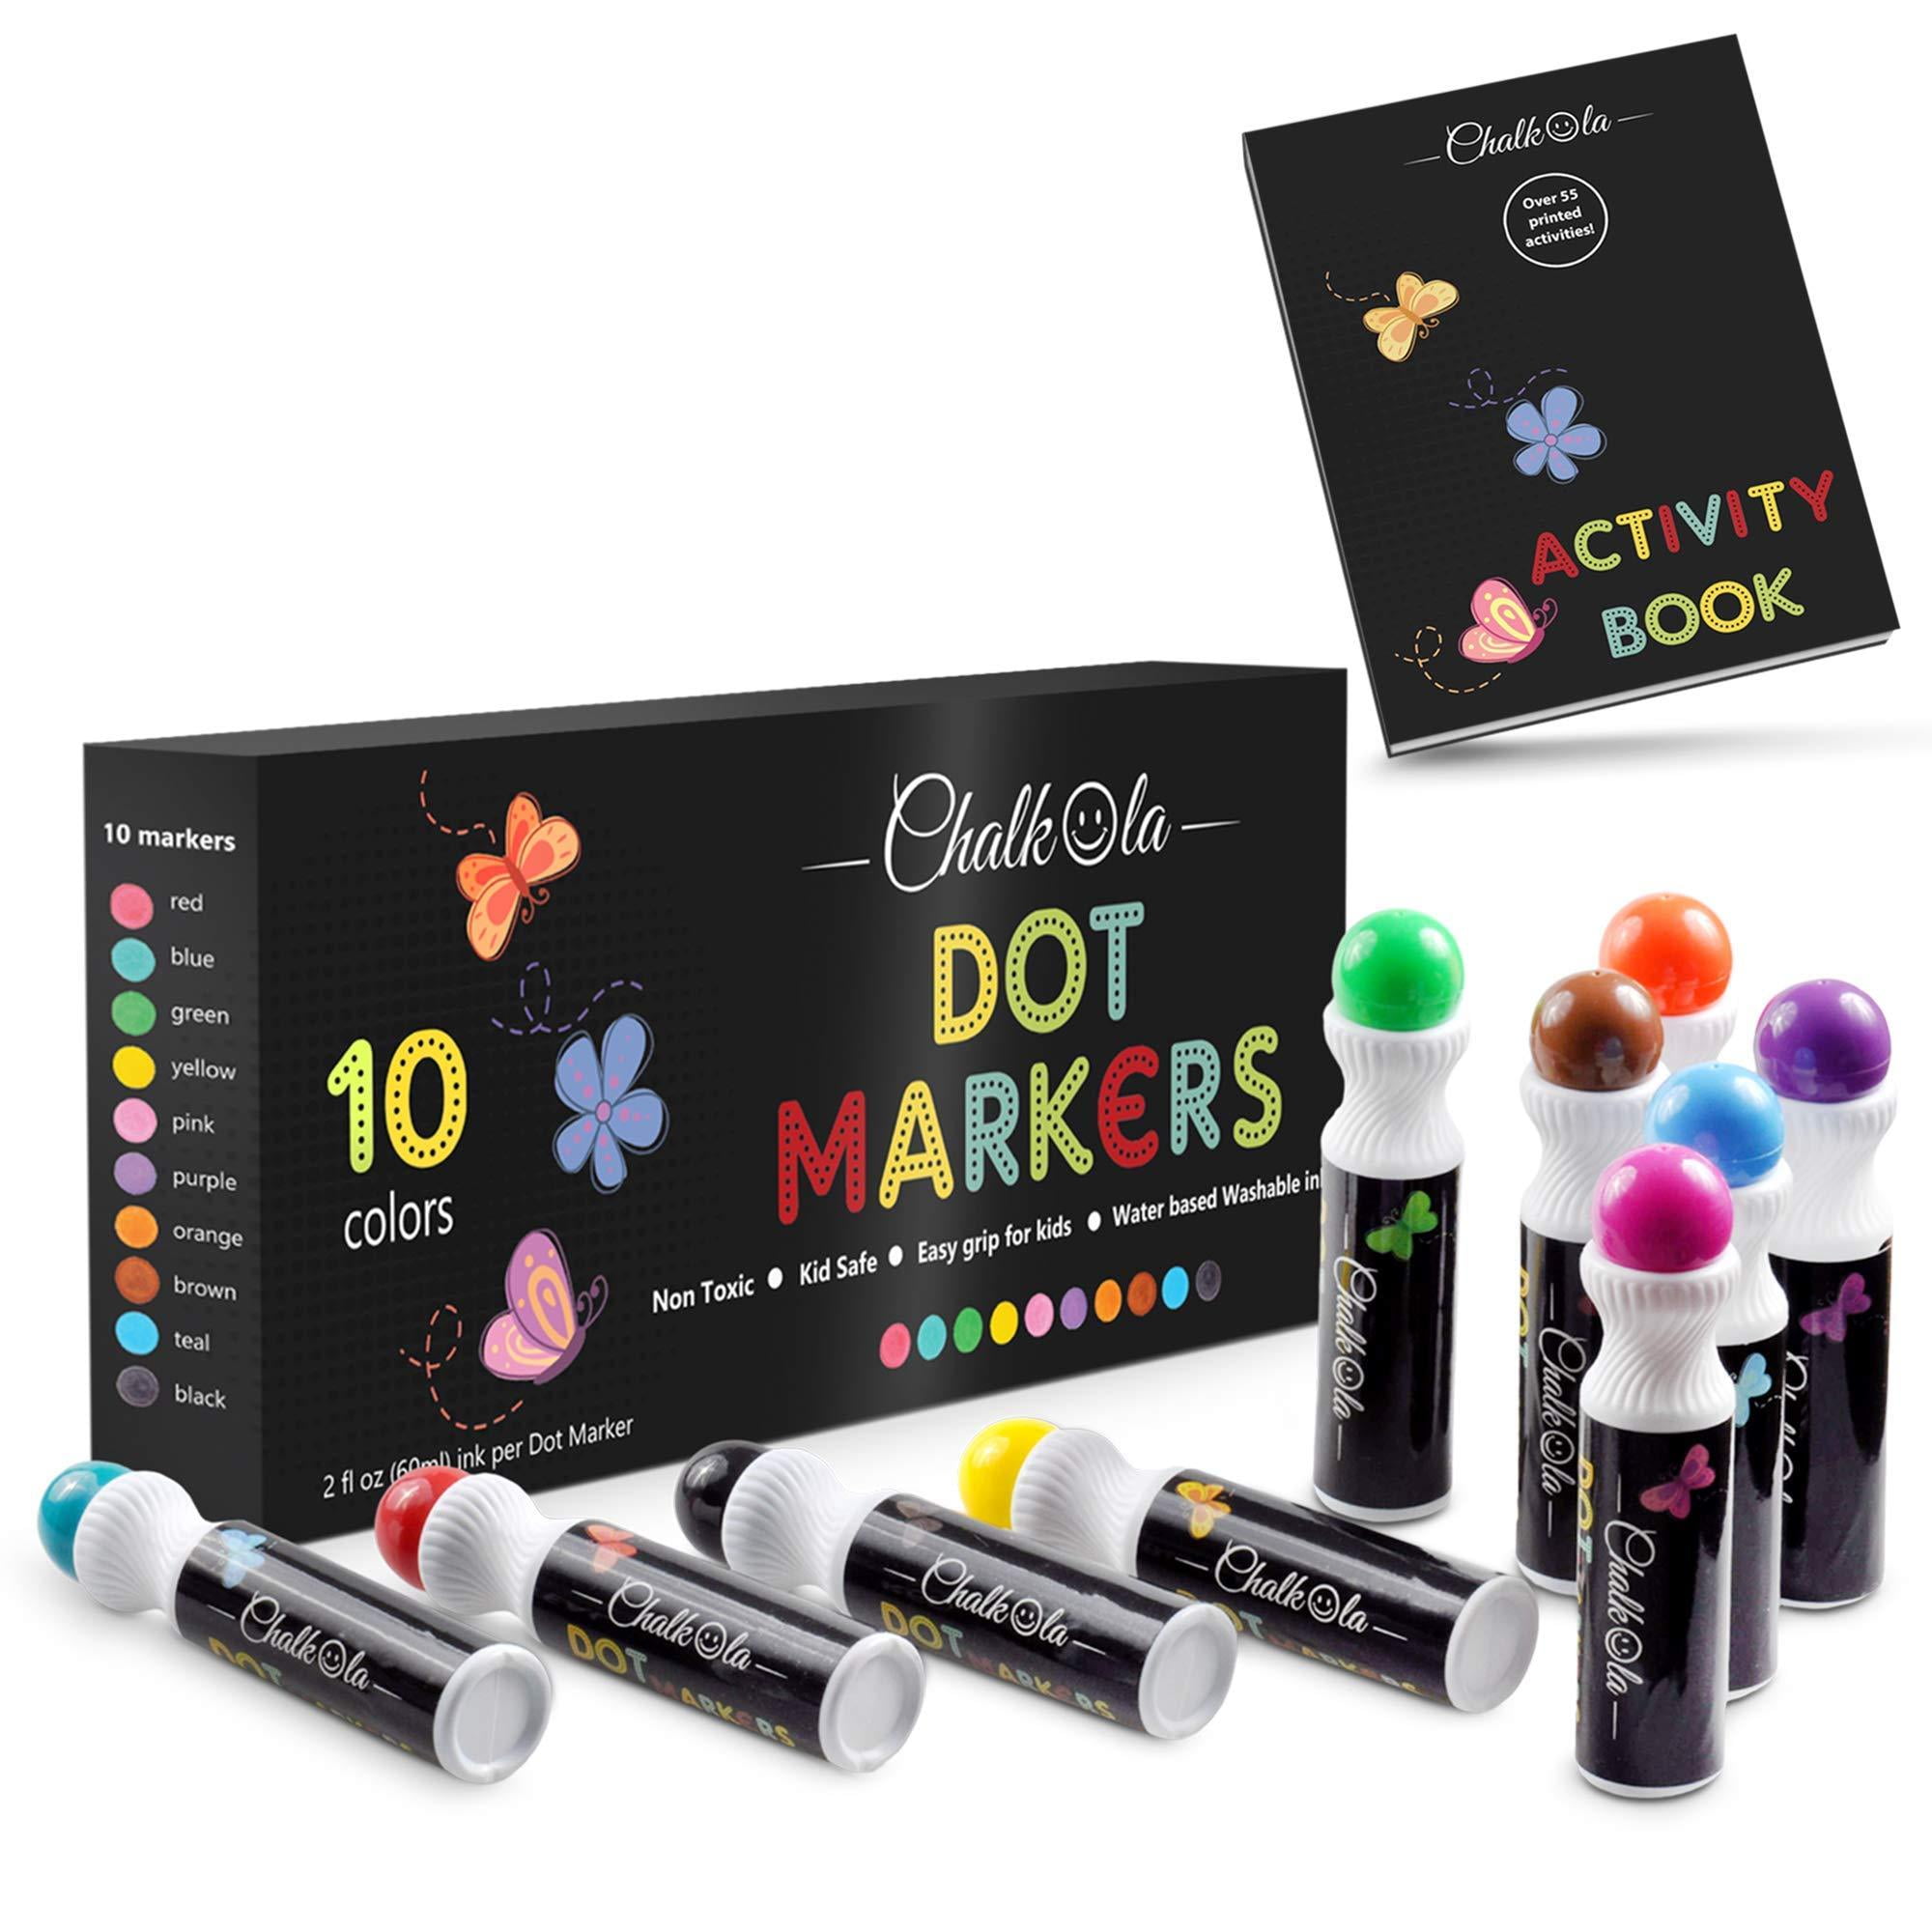 Washable Dot Markers For Kids (Pack of 8 Pens) with Activity Book -  Chalkola Art Supply